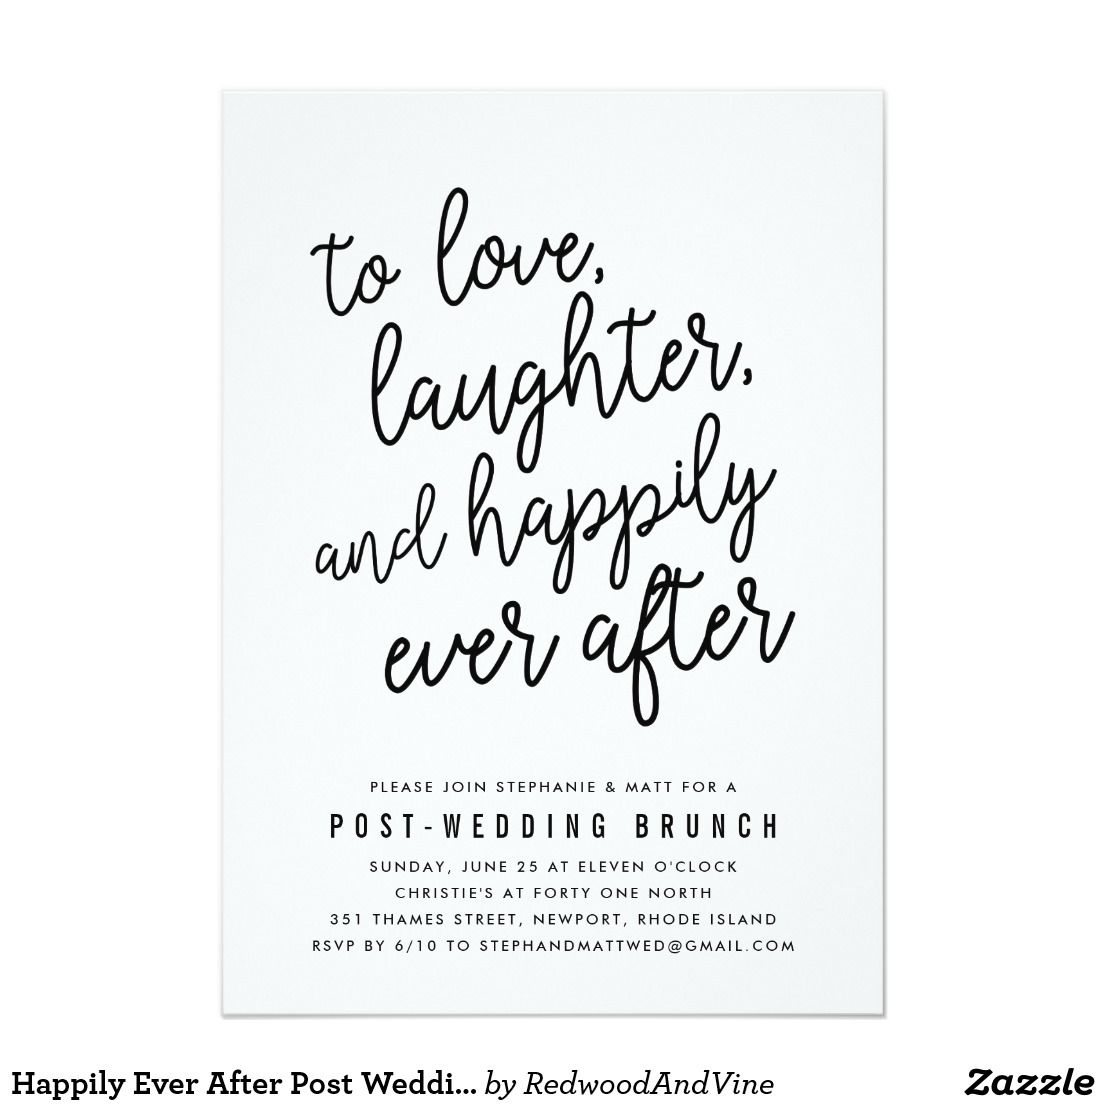 Post Wedding Brunch Invitations Happily Ever After Post Wedding Brunch Invitation In 2018 Wedding